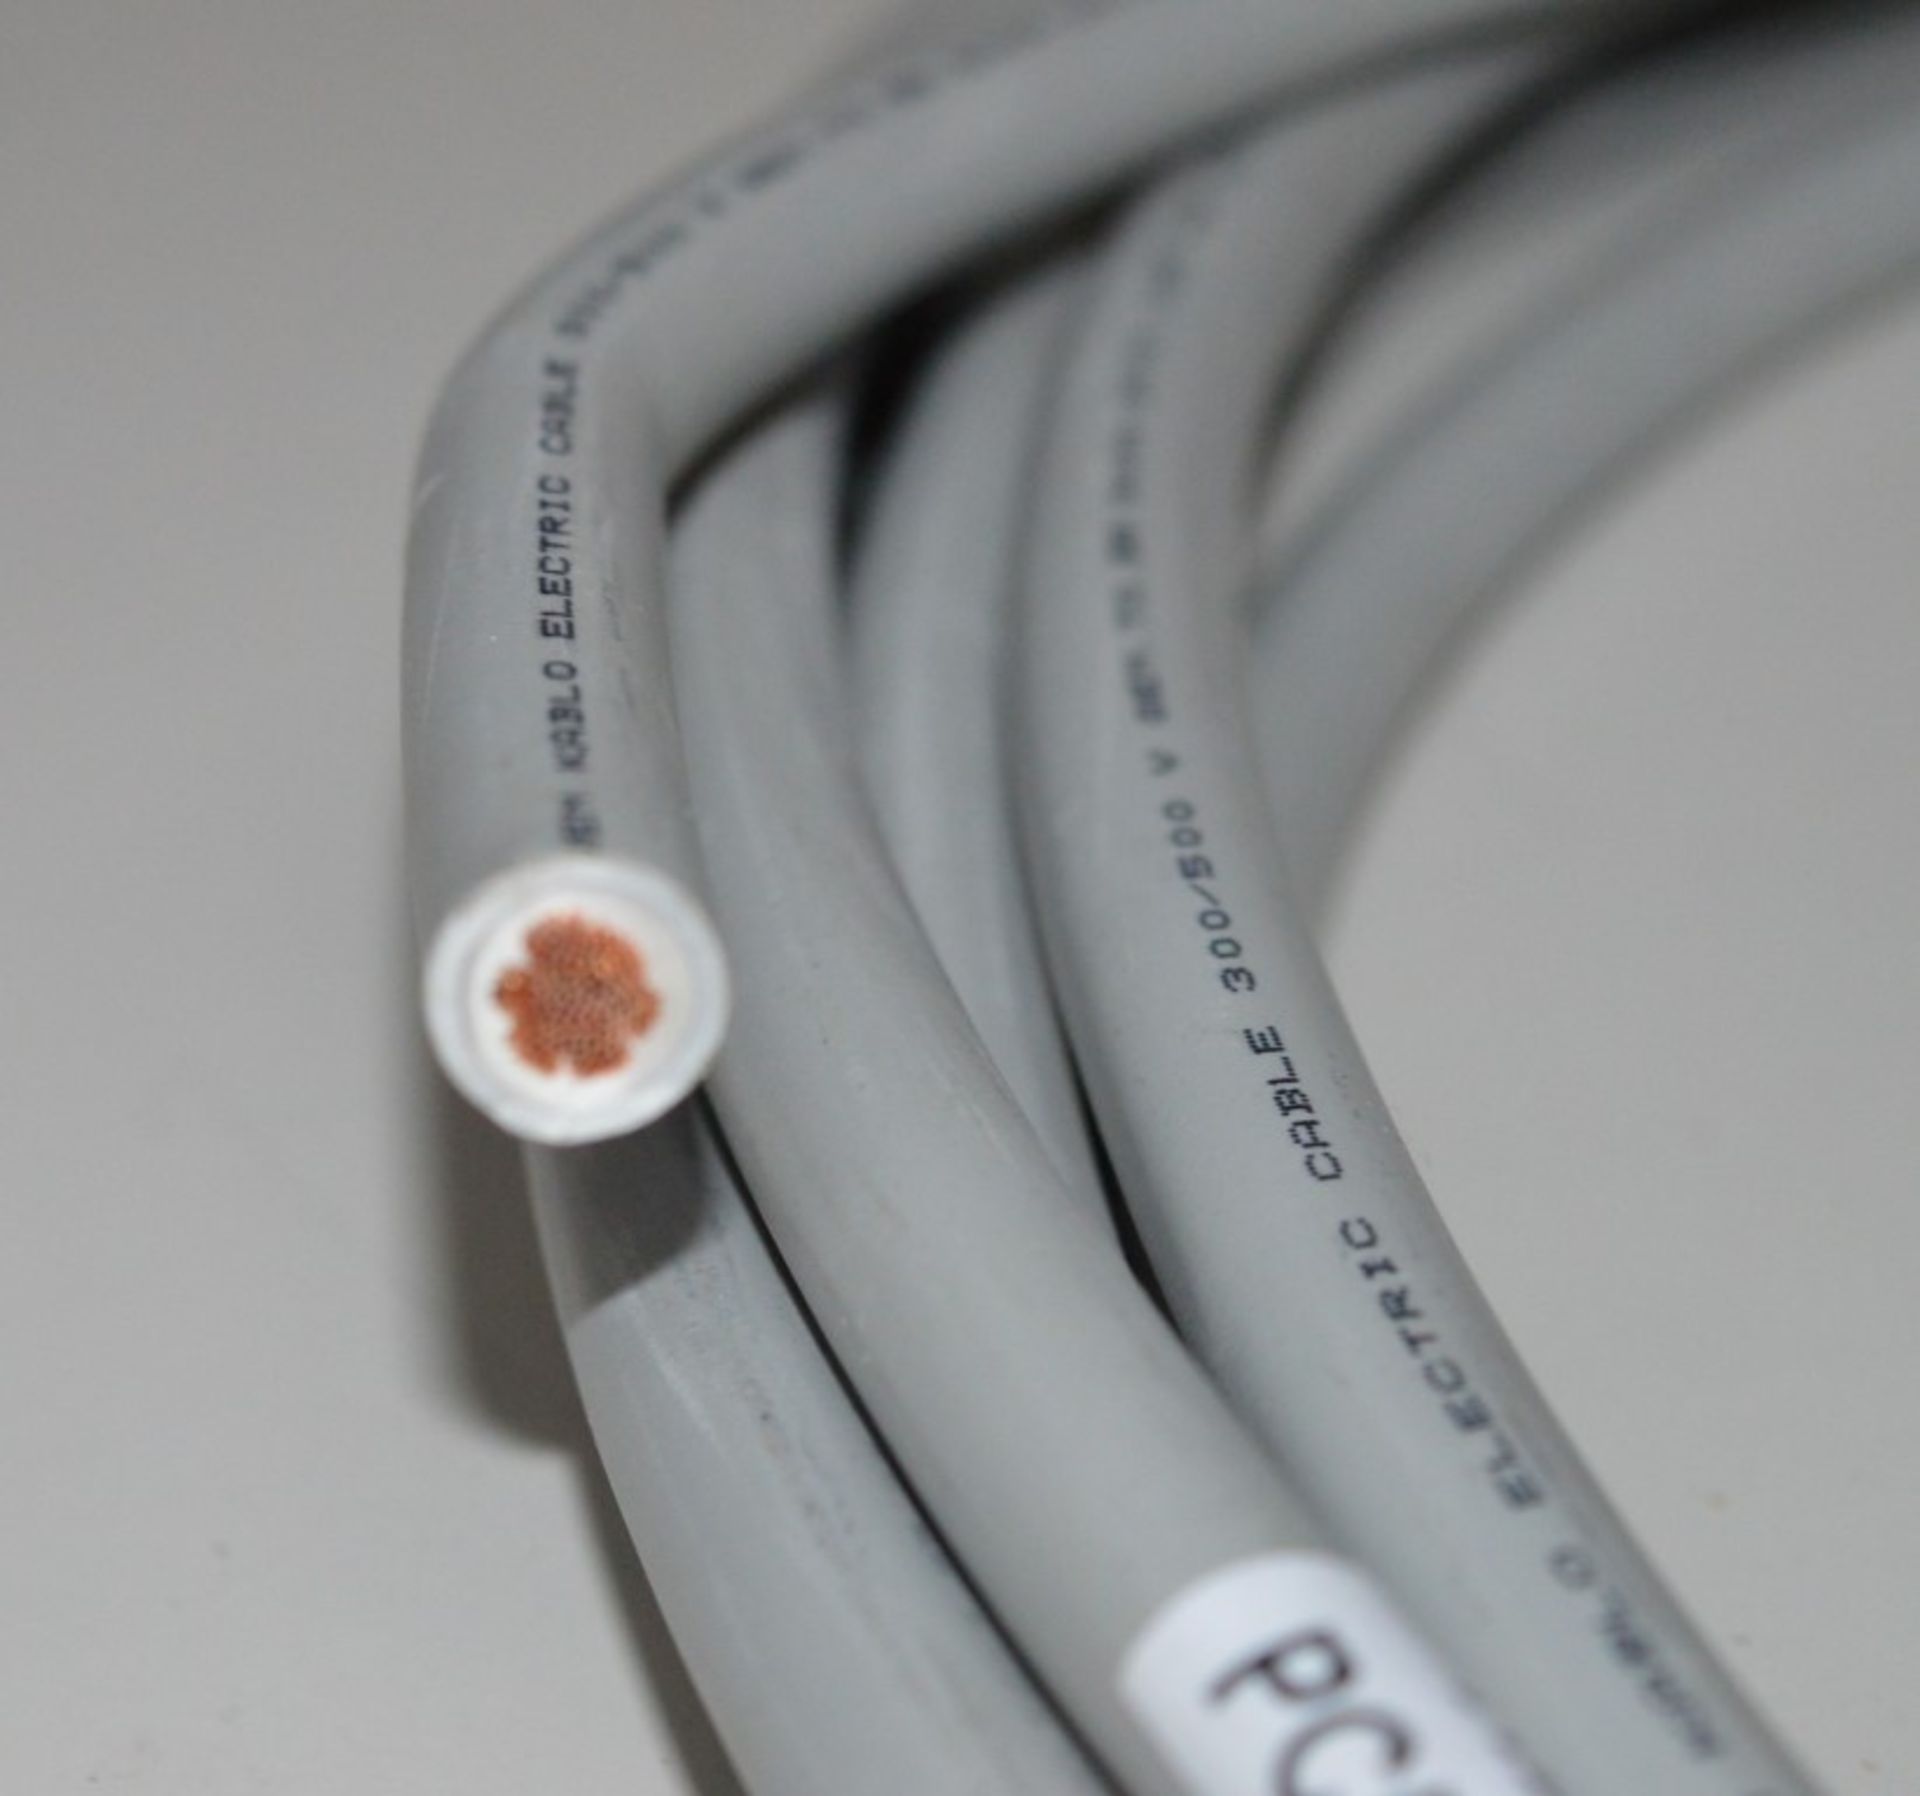 10 x Meters of OZGUVEN Electric Cable 300/500v - Unused - CL300 - Ref PC580 - Location: Altrincham - Image 9 of 10